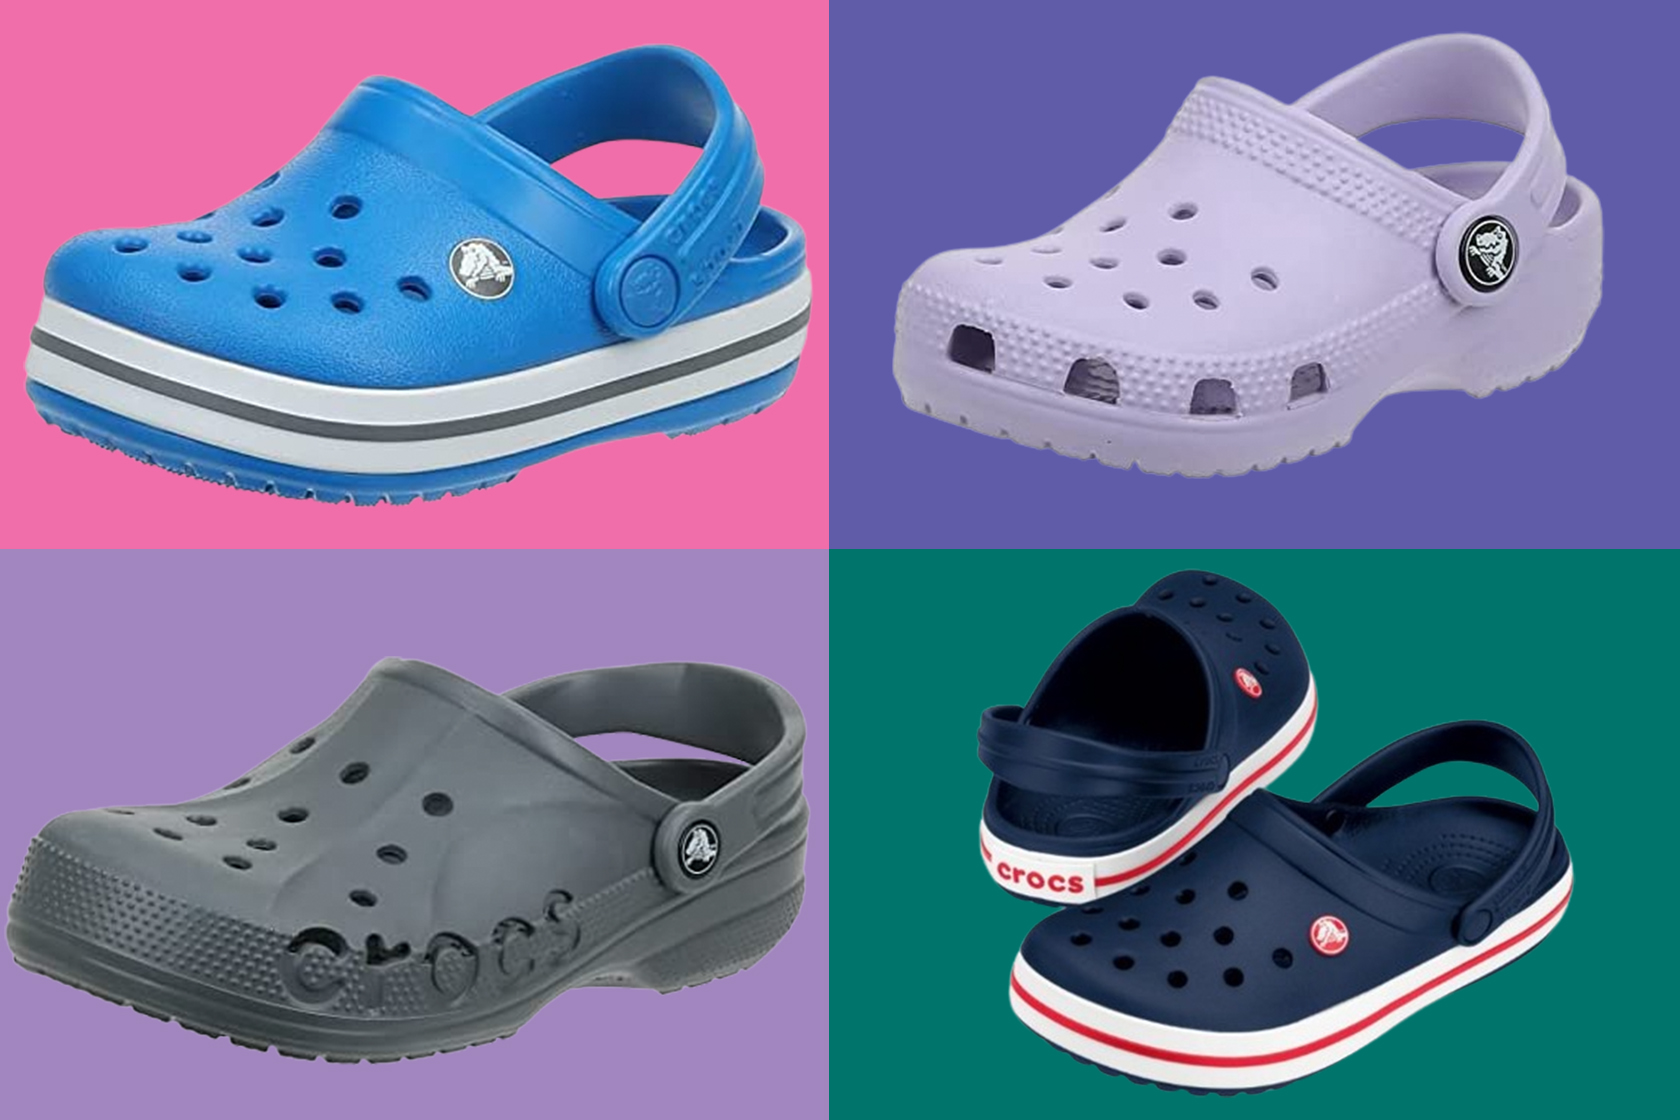 Crocs are back in style and on sale at Woot!